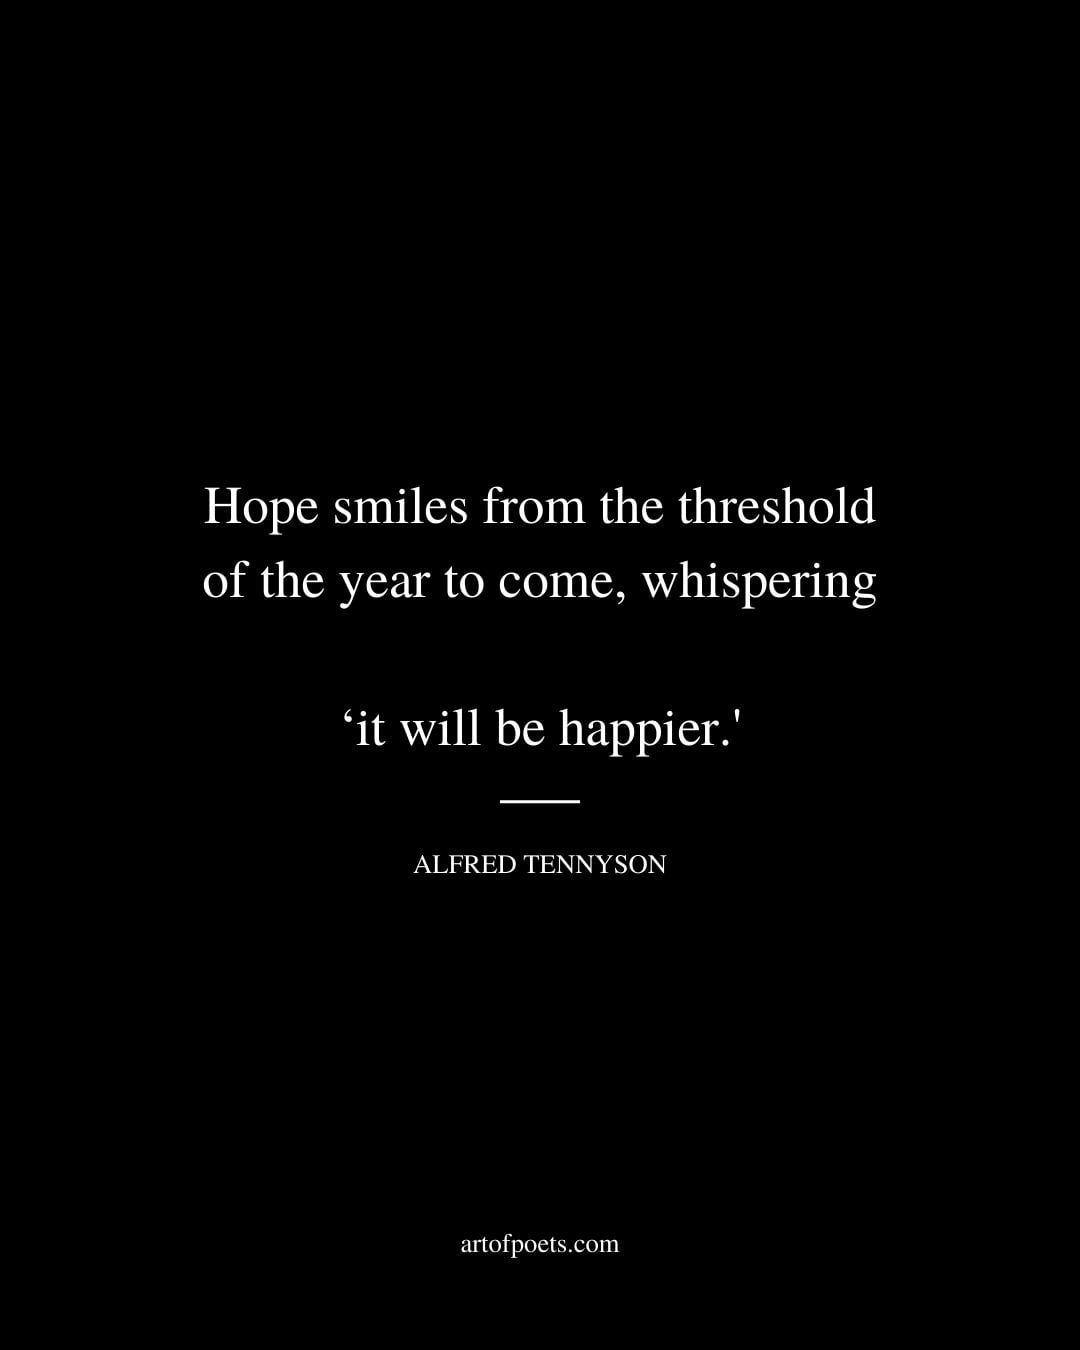 Hope smiles from the threshold of the year to come whispering ‘it will be happier. – Alfred Tennyson